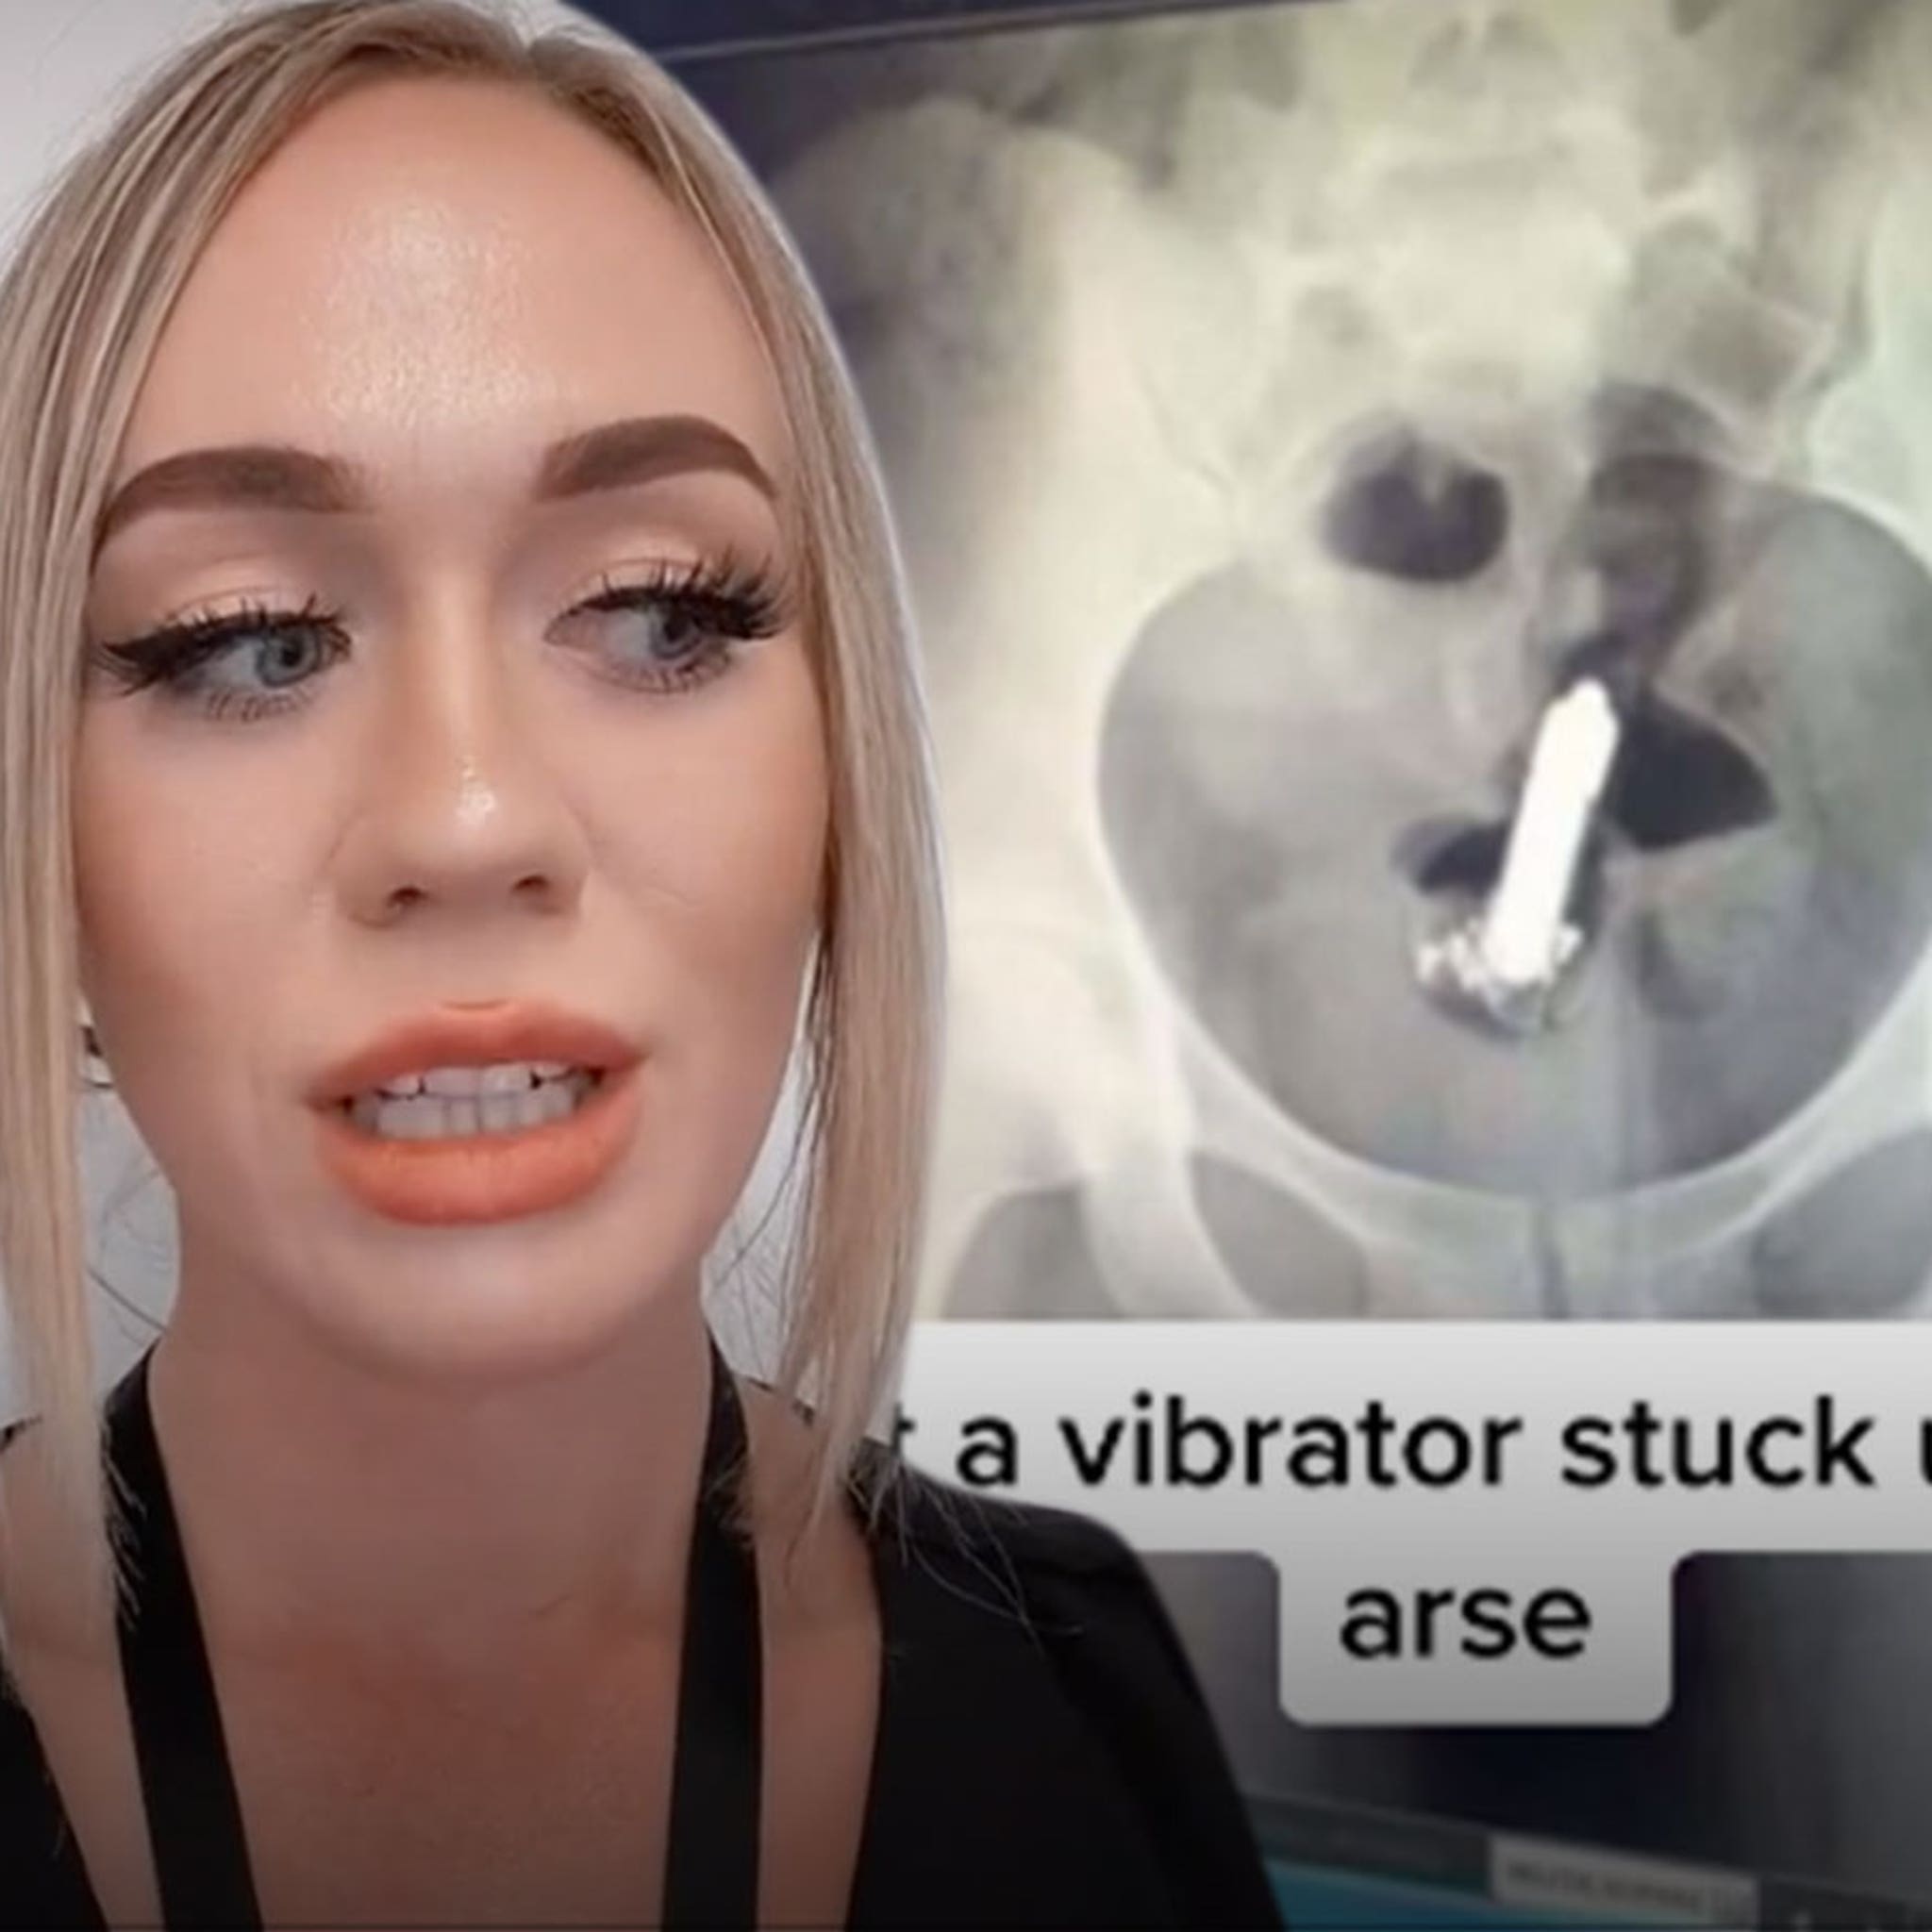 TikTok Star Says She Needed Surgery After Losing Vibrator in Butt photo